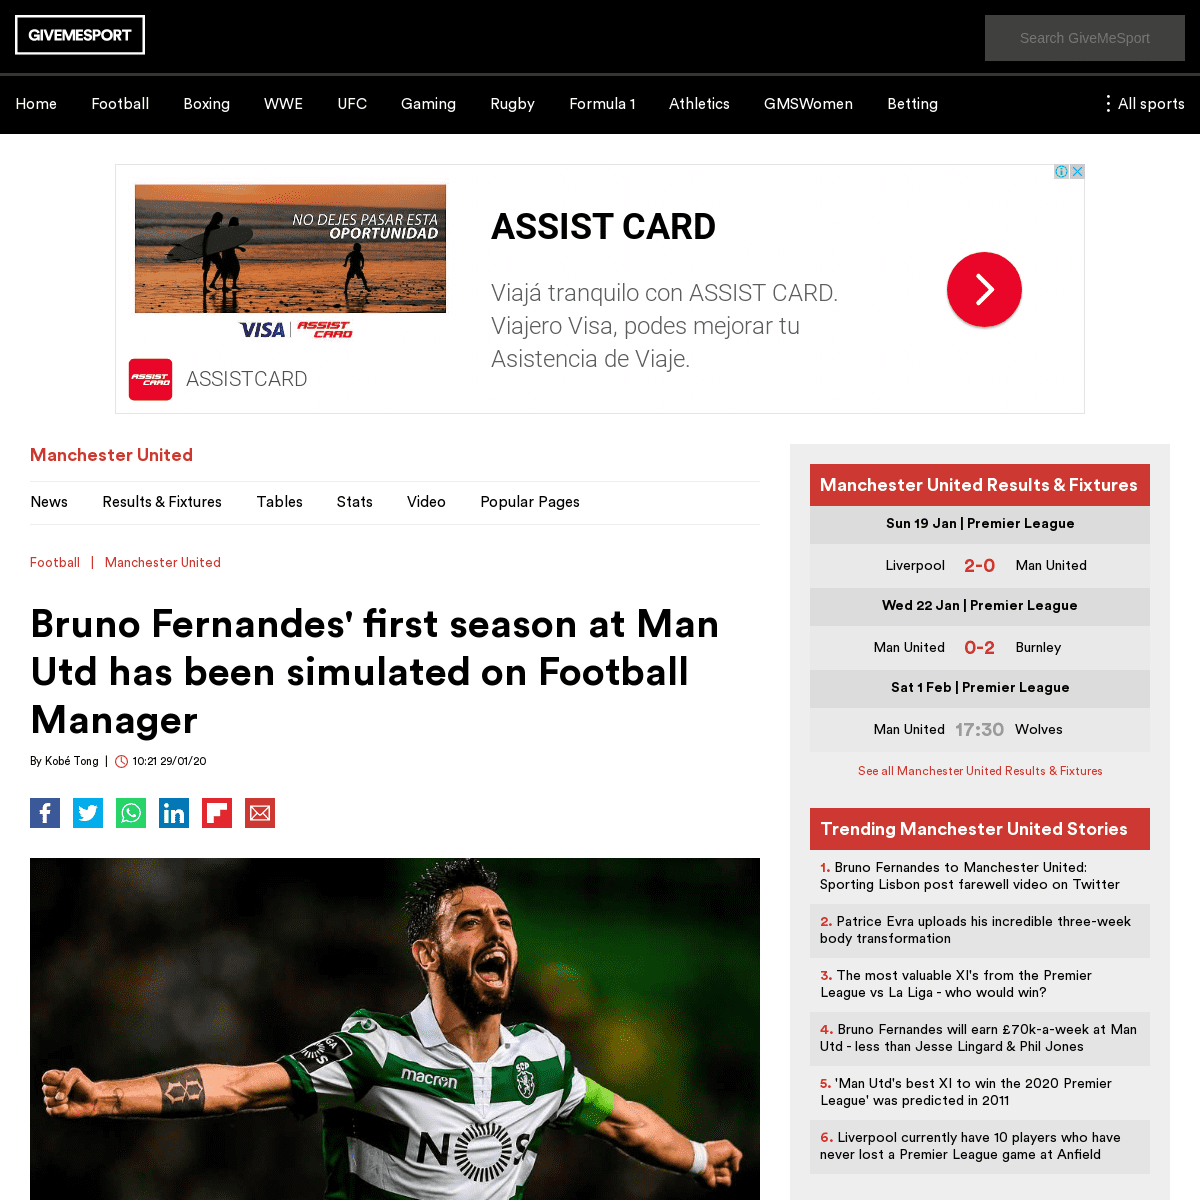 A complete backup of www.givemesport.com/1542254-bruno-fernandes-first-season-at-man-utd-has-been-simulated-on-football-manager